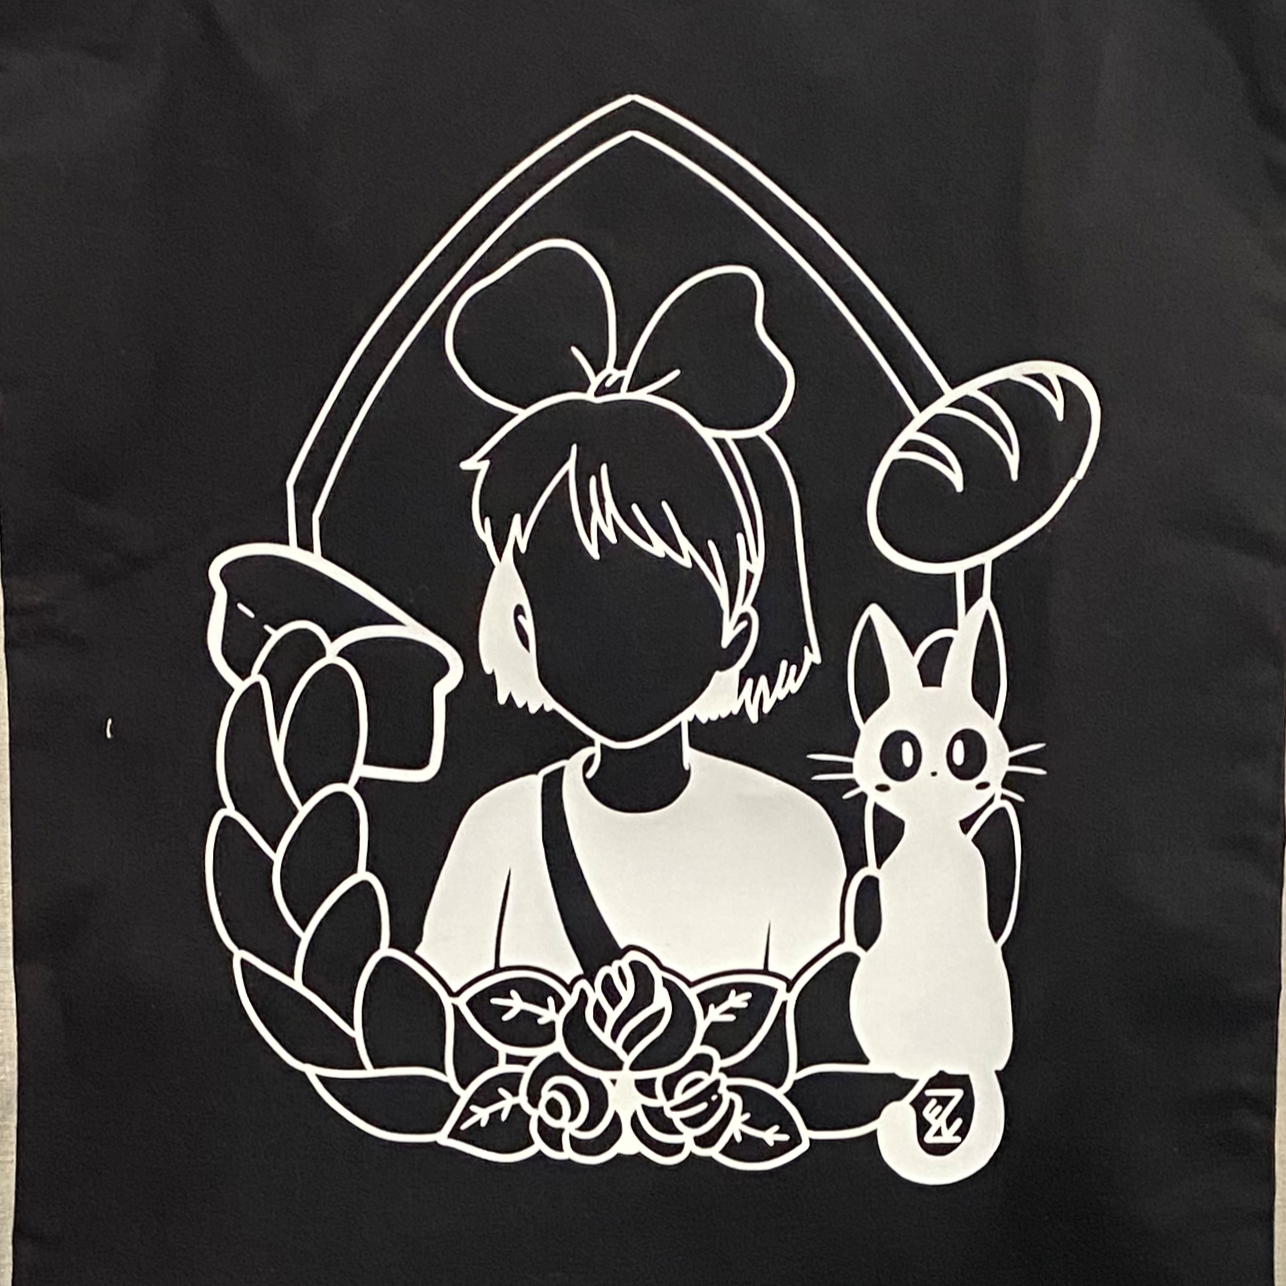 Tote Bags (Anime/Game Inspired)